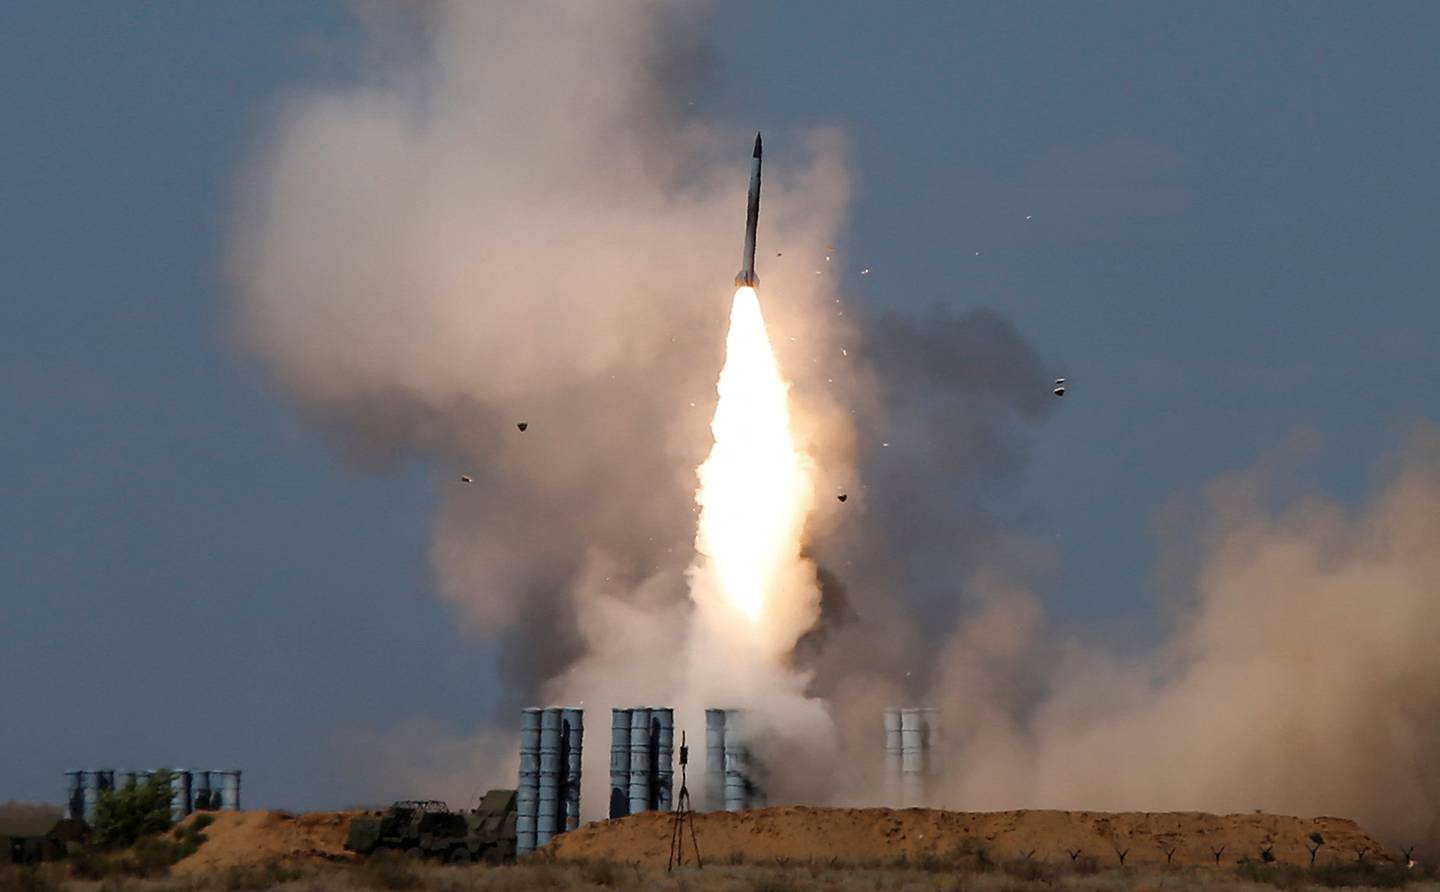  An S-300 air defence missile system launches a missile at a shooting range in Russia. Reuters
